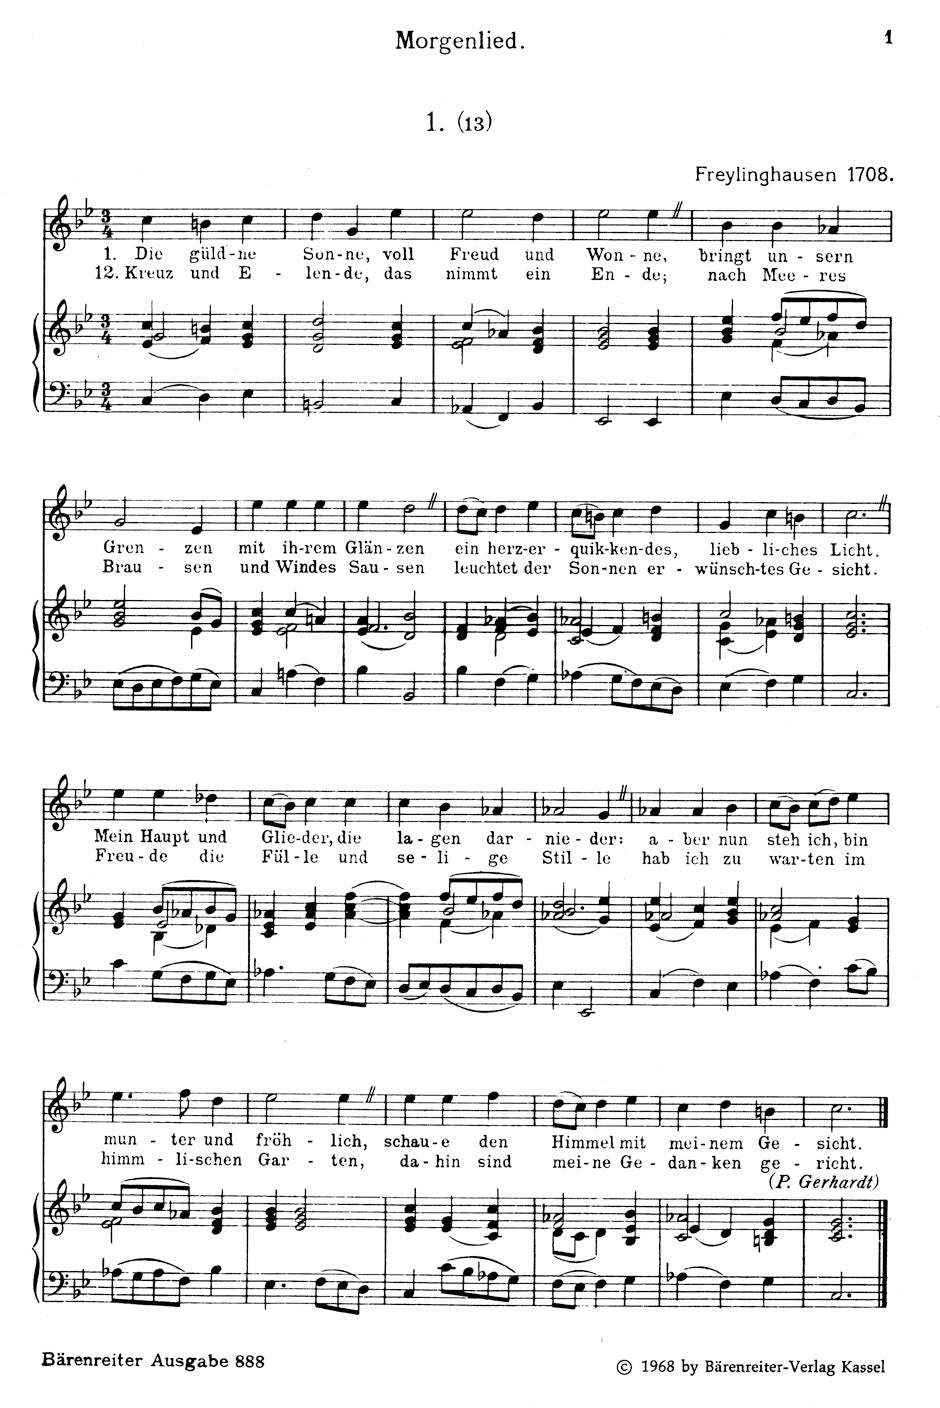 Bach Schemelli Song Book 1736 and six lieder from the Notebook for Anna Magdalena Bach 1725 for High voice BWV 439-507/511-514,516,517 (In the original key)